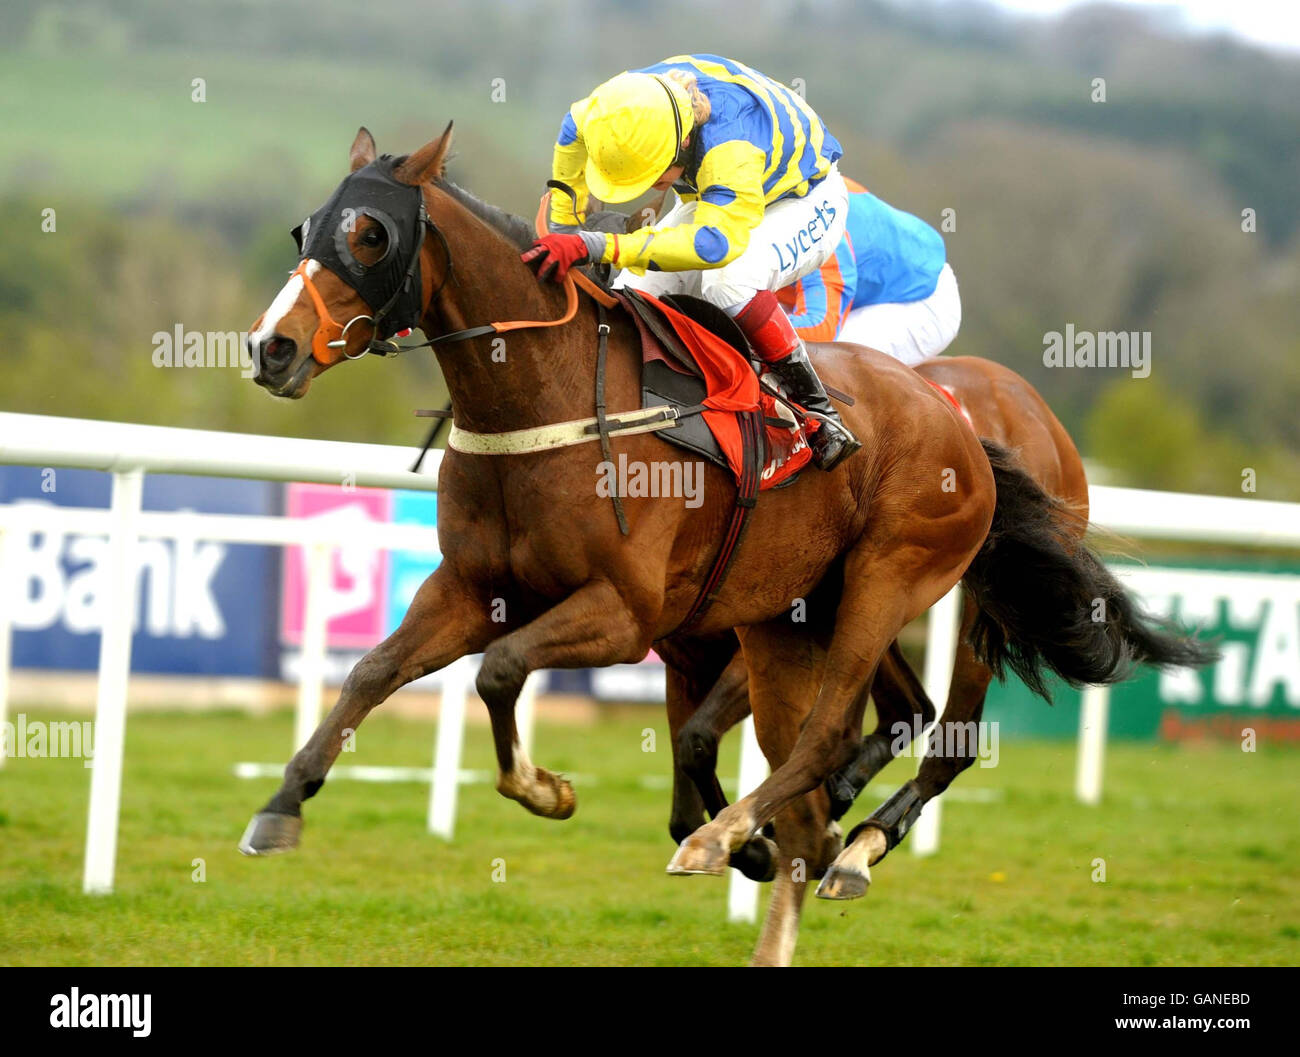 Robert Thornton on Blazing Bailey, trained by Alan King, wins the Ladbrokes.com World Series Hurdle during the 2008 National Hunt Festival at Punchestown Racecourse, Ireland. Stock Photo